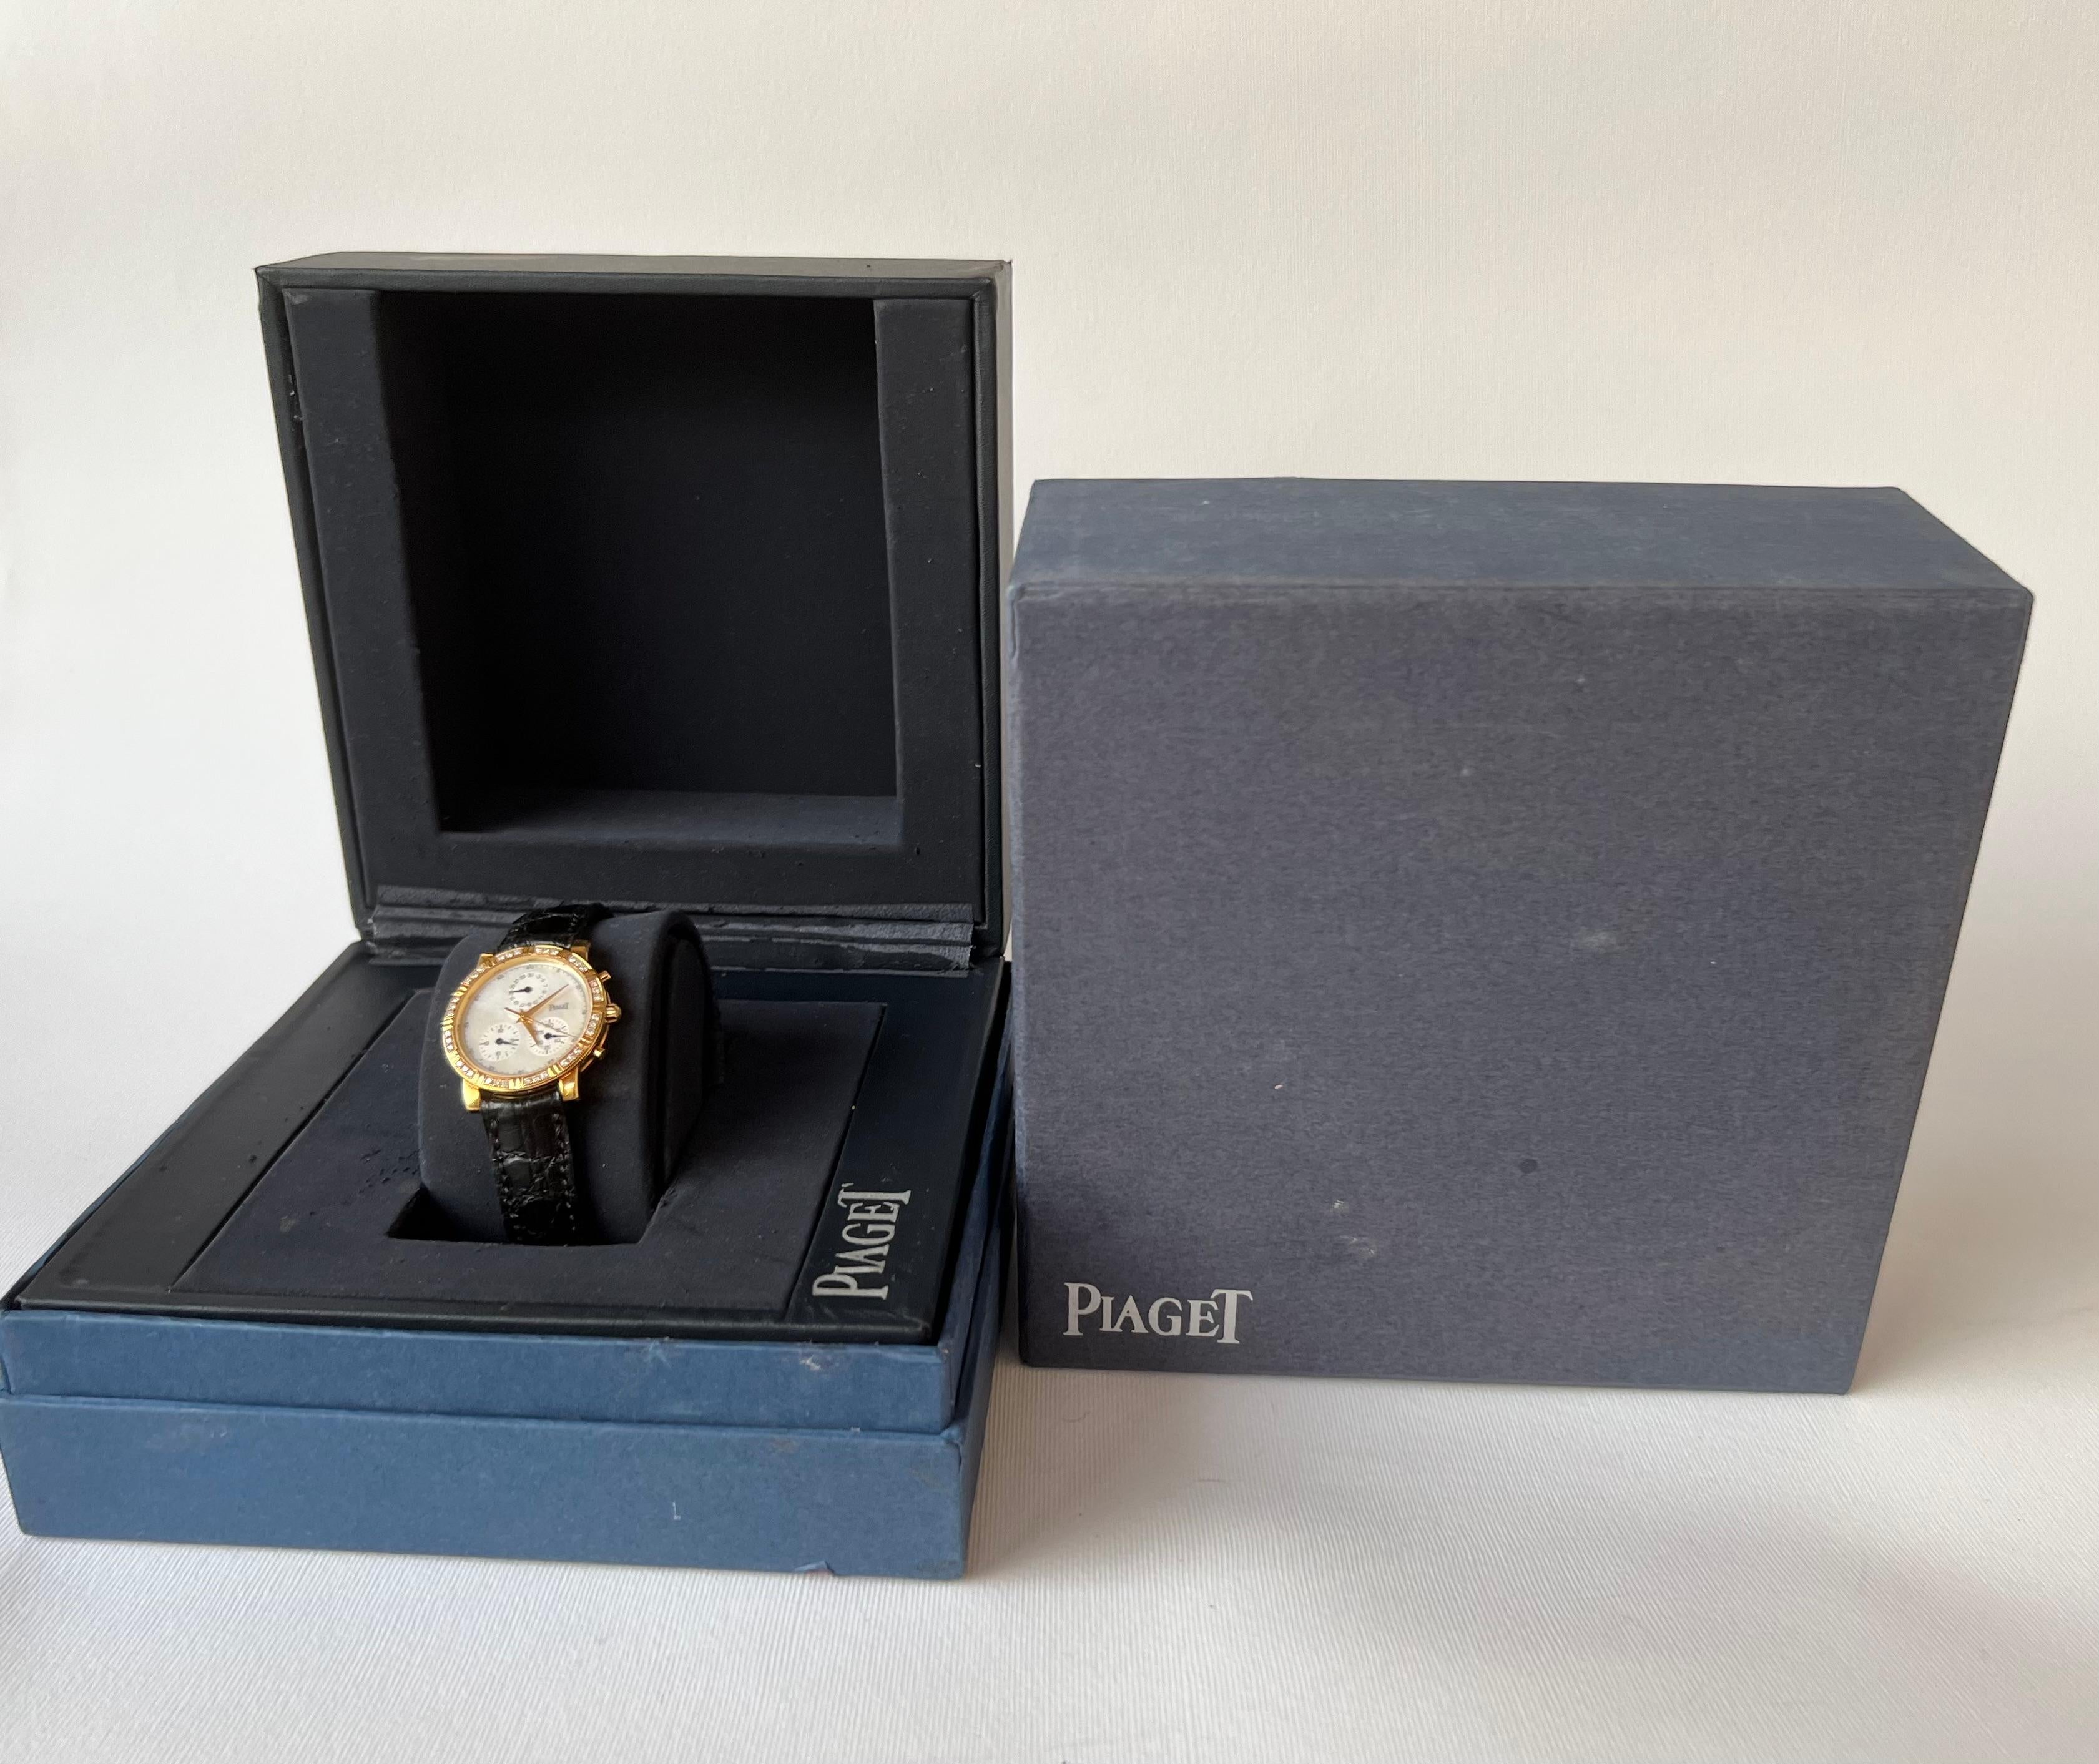 Piaget Haute Complication Chronograph 14013 MOP Dial 18k Gold Diamond Watch In Excellent Condition For Sale In Toronto, CA